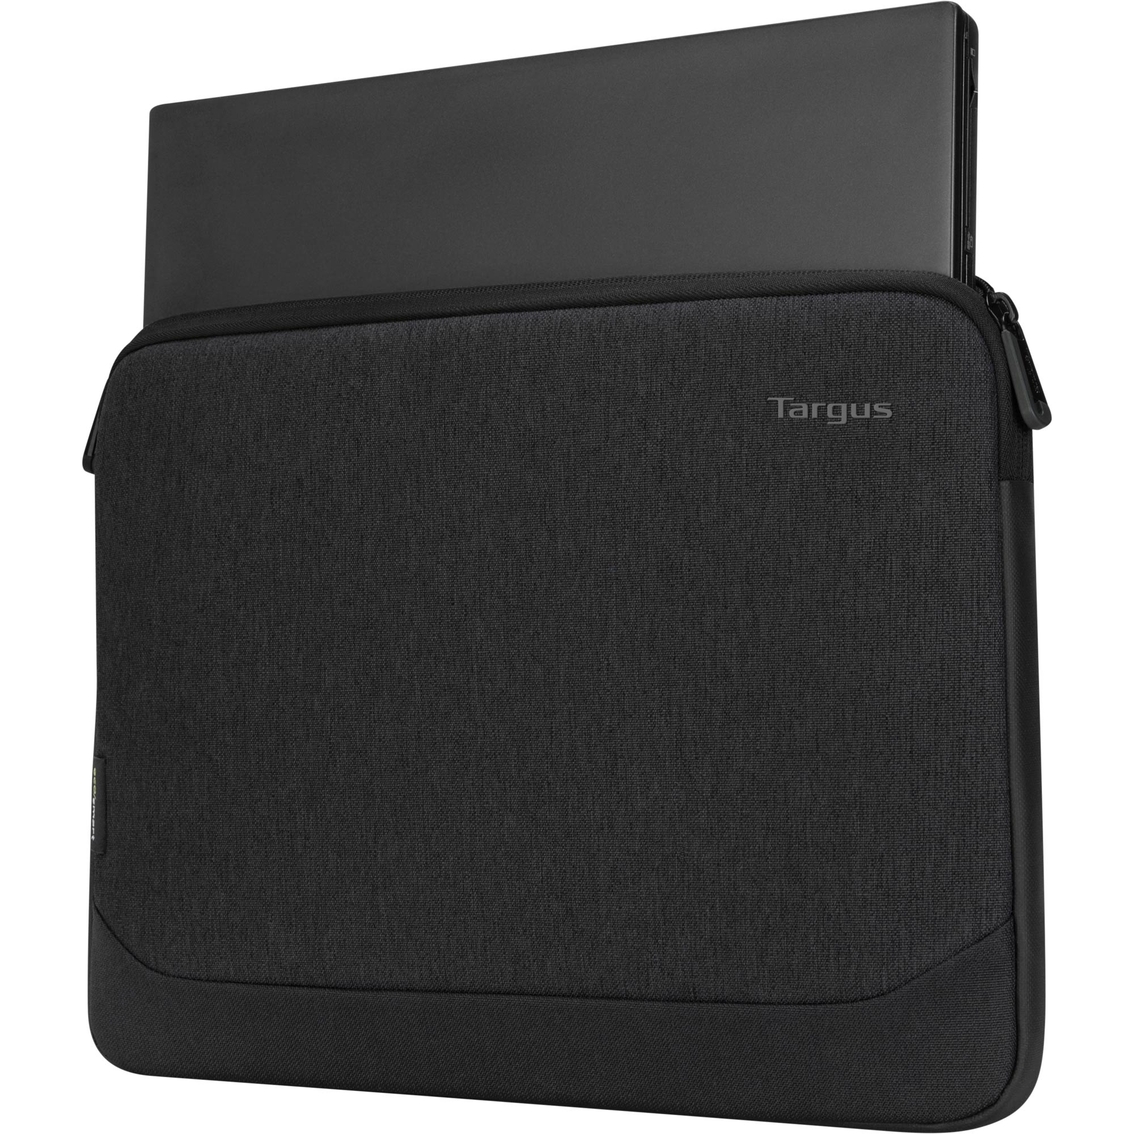 Targus 13-14 in. Cypress Sleeve with EcoSmart - Image 5 of 5